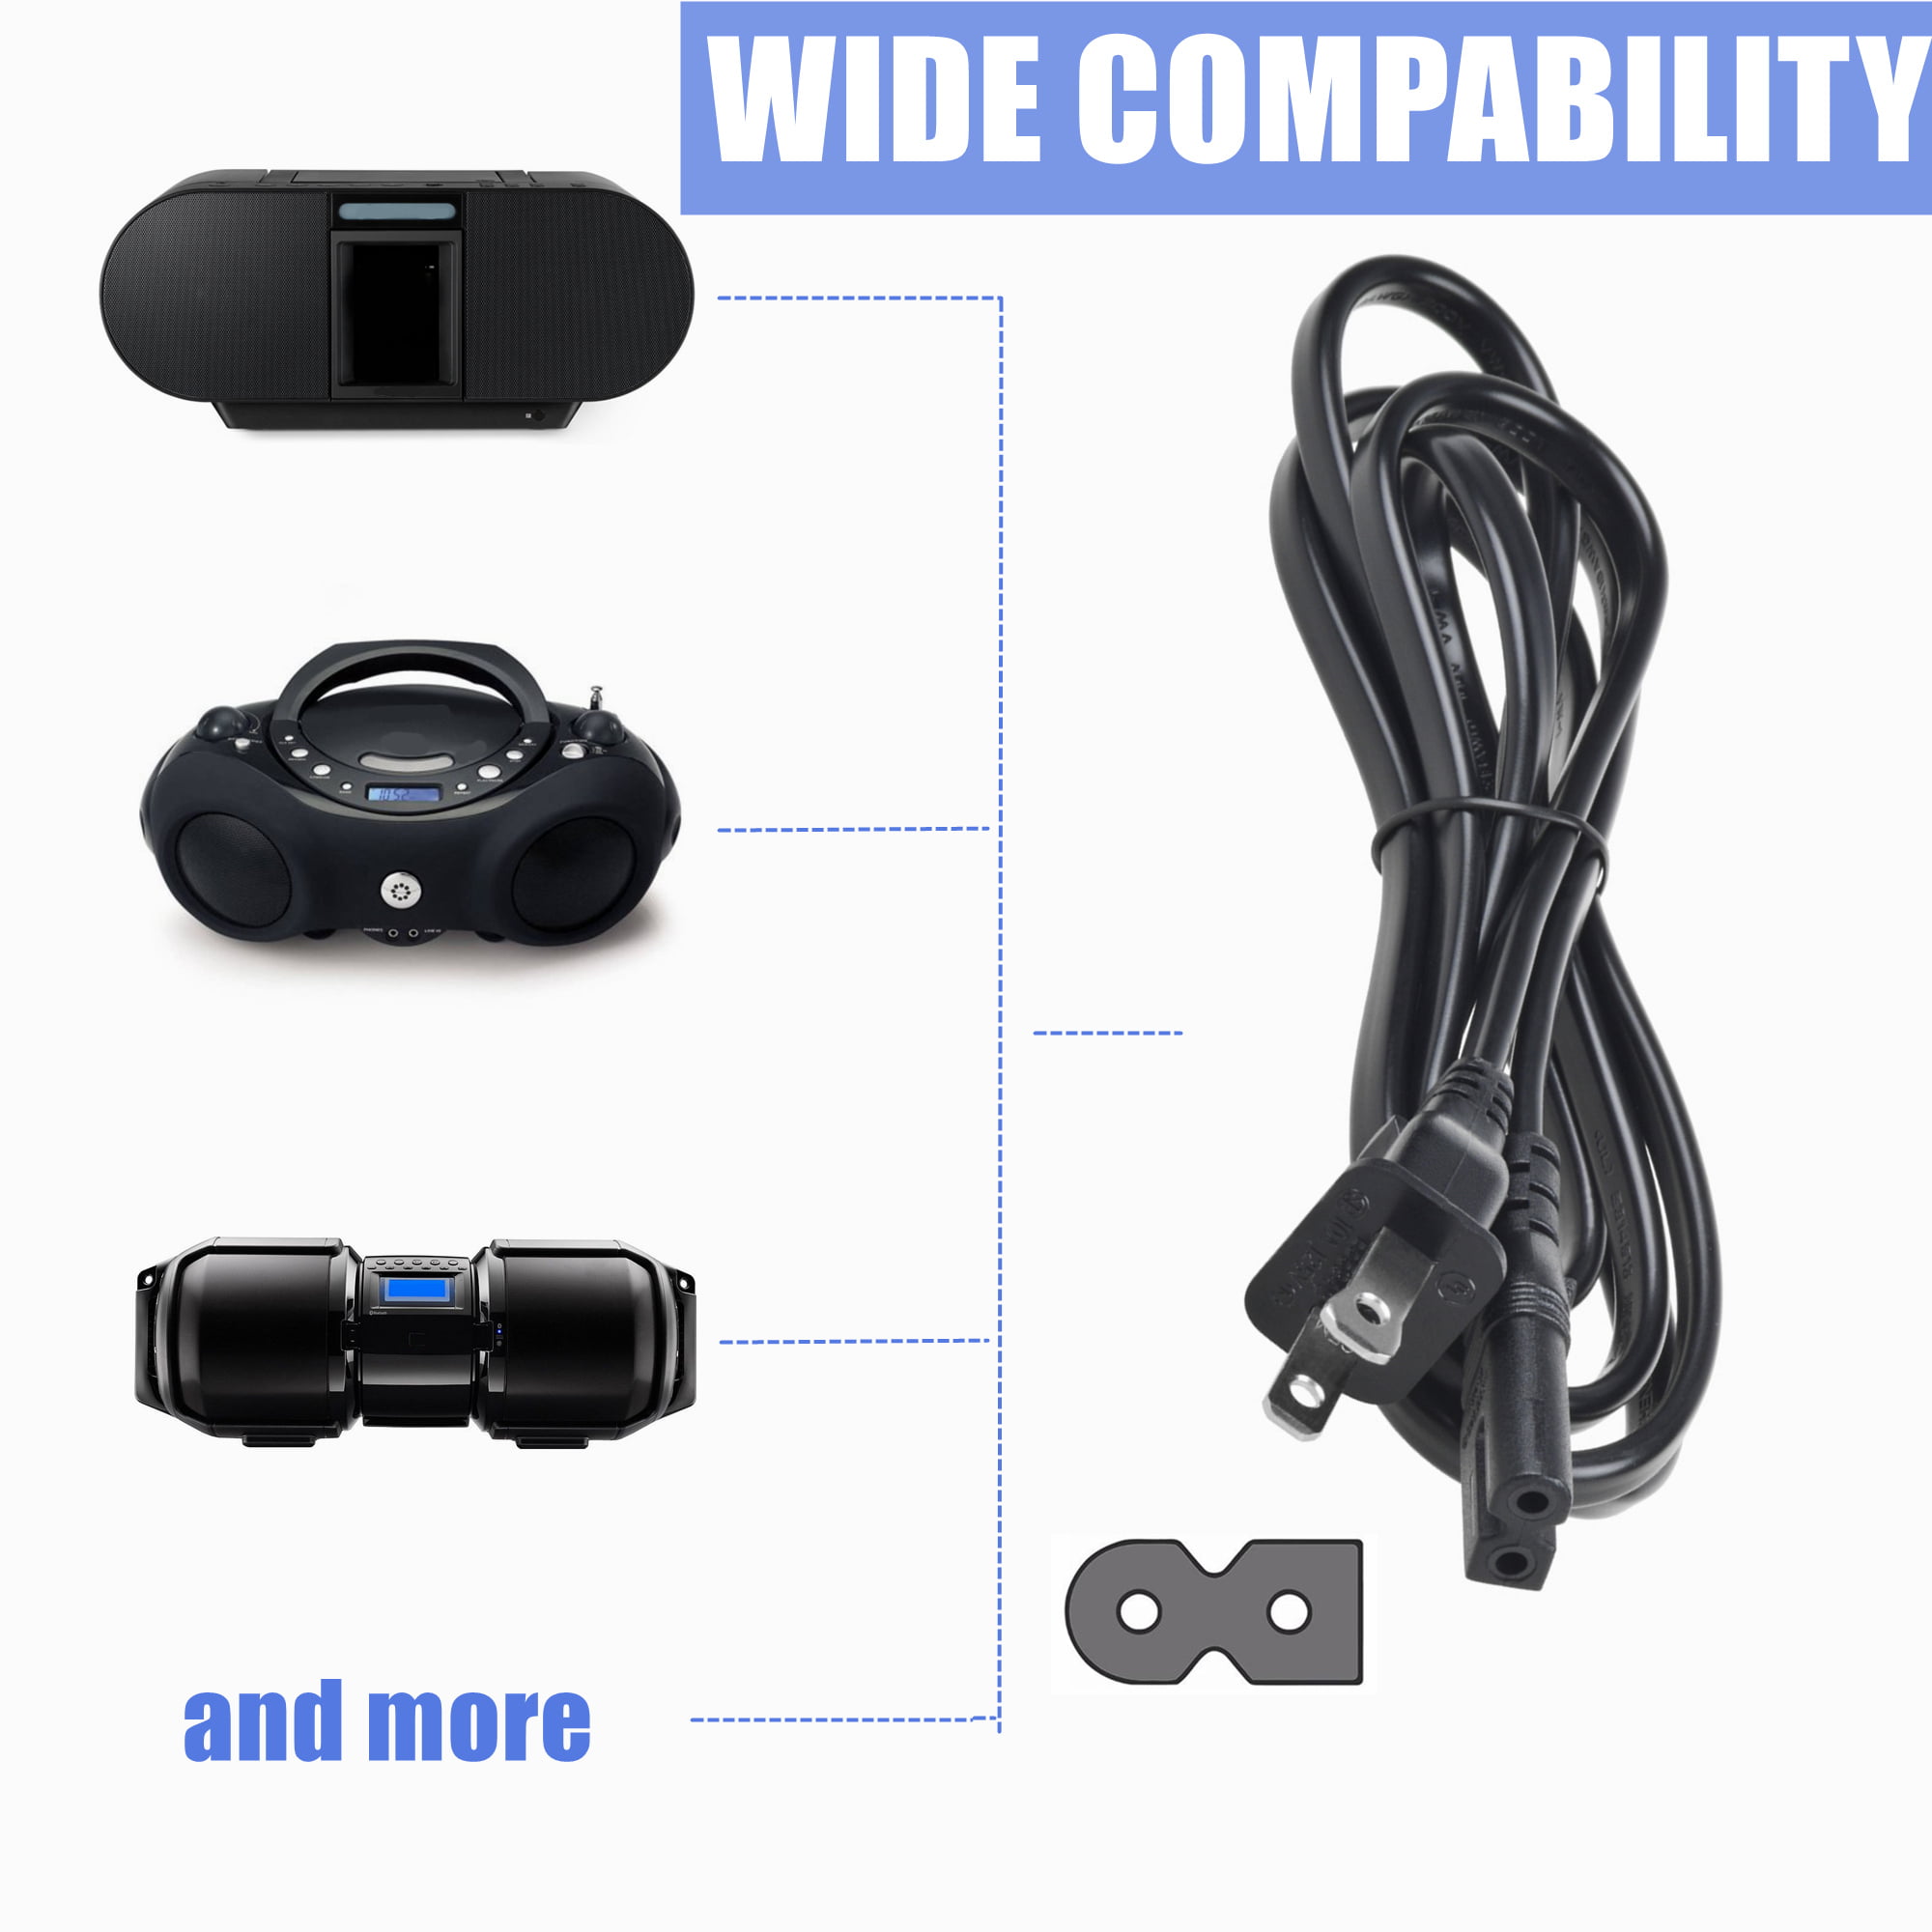 5ft AC Power Cord Outlet Socket Cable Plug Lead for The Singing Machine GPX J100S CD+G Portable Karaoke Party Singing Machine System SMDigital SM Digital CDG Karaoke System UL Listed Accessory USA